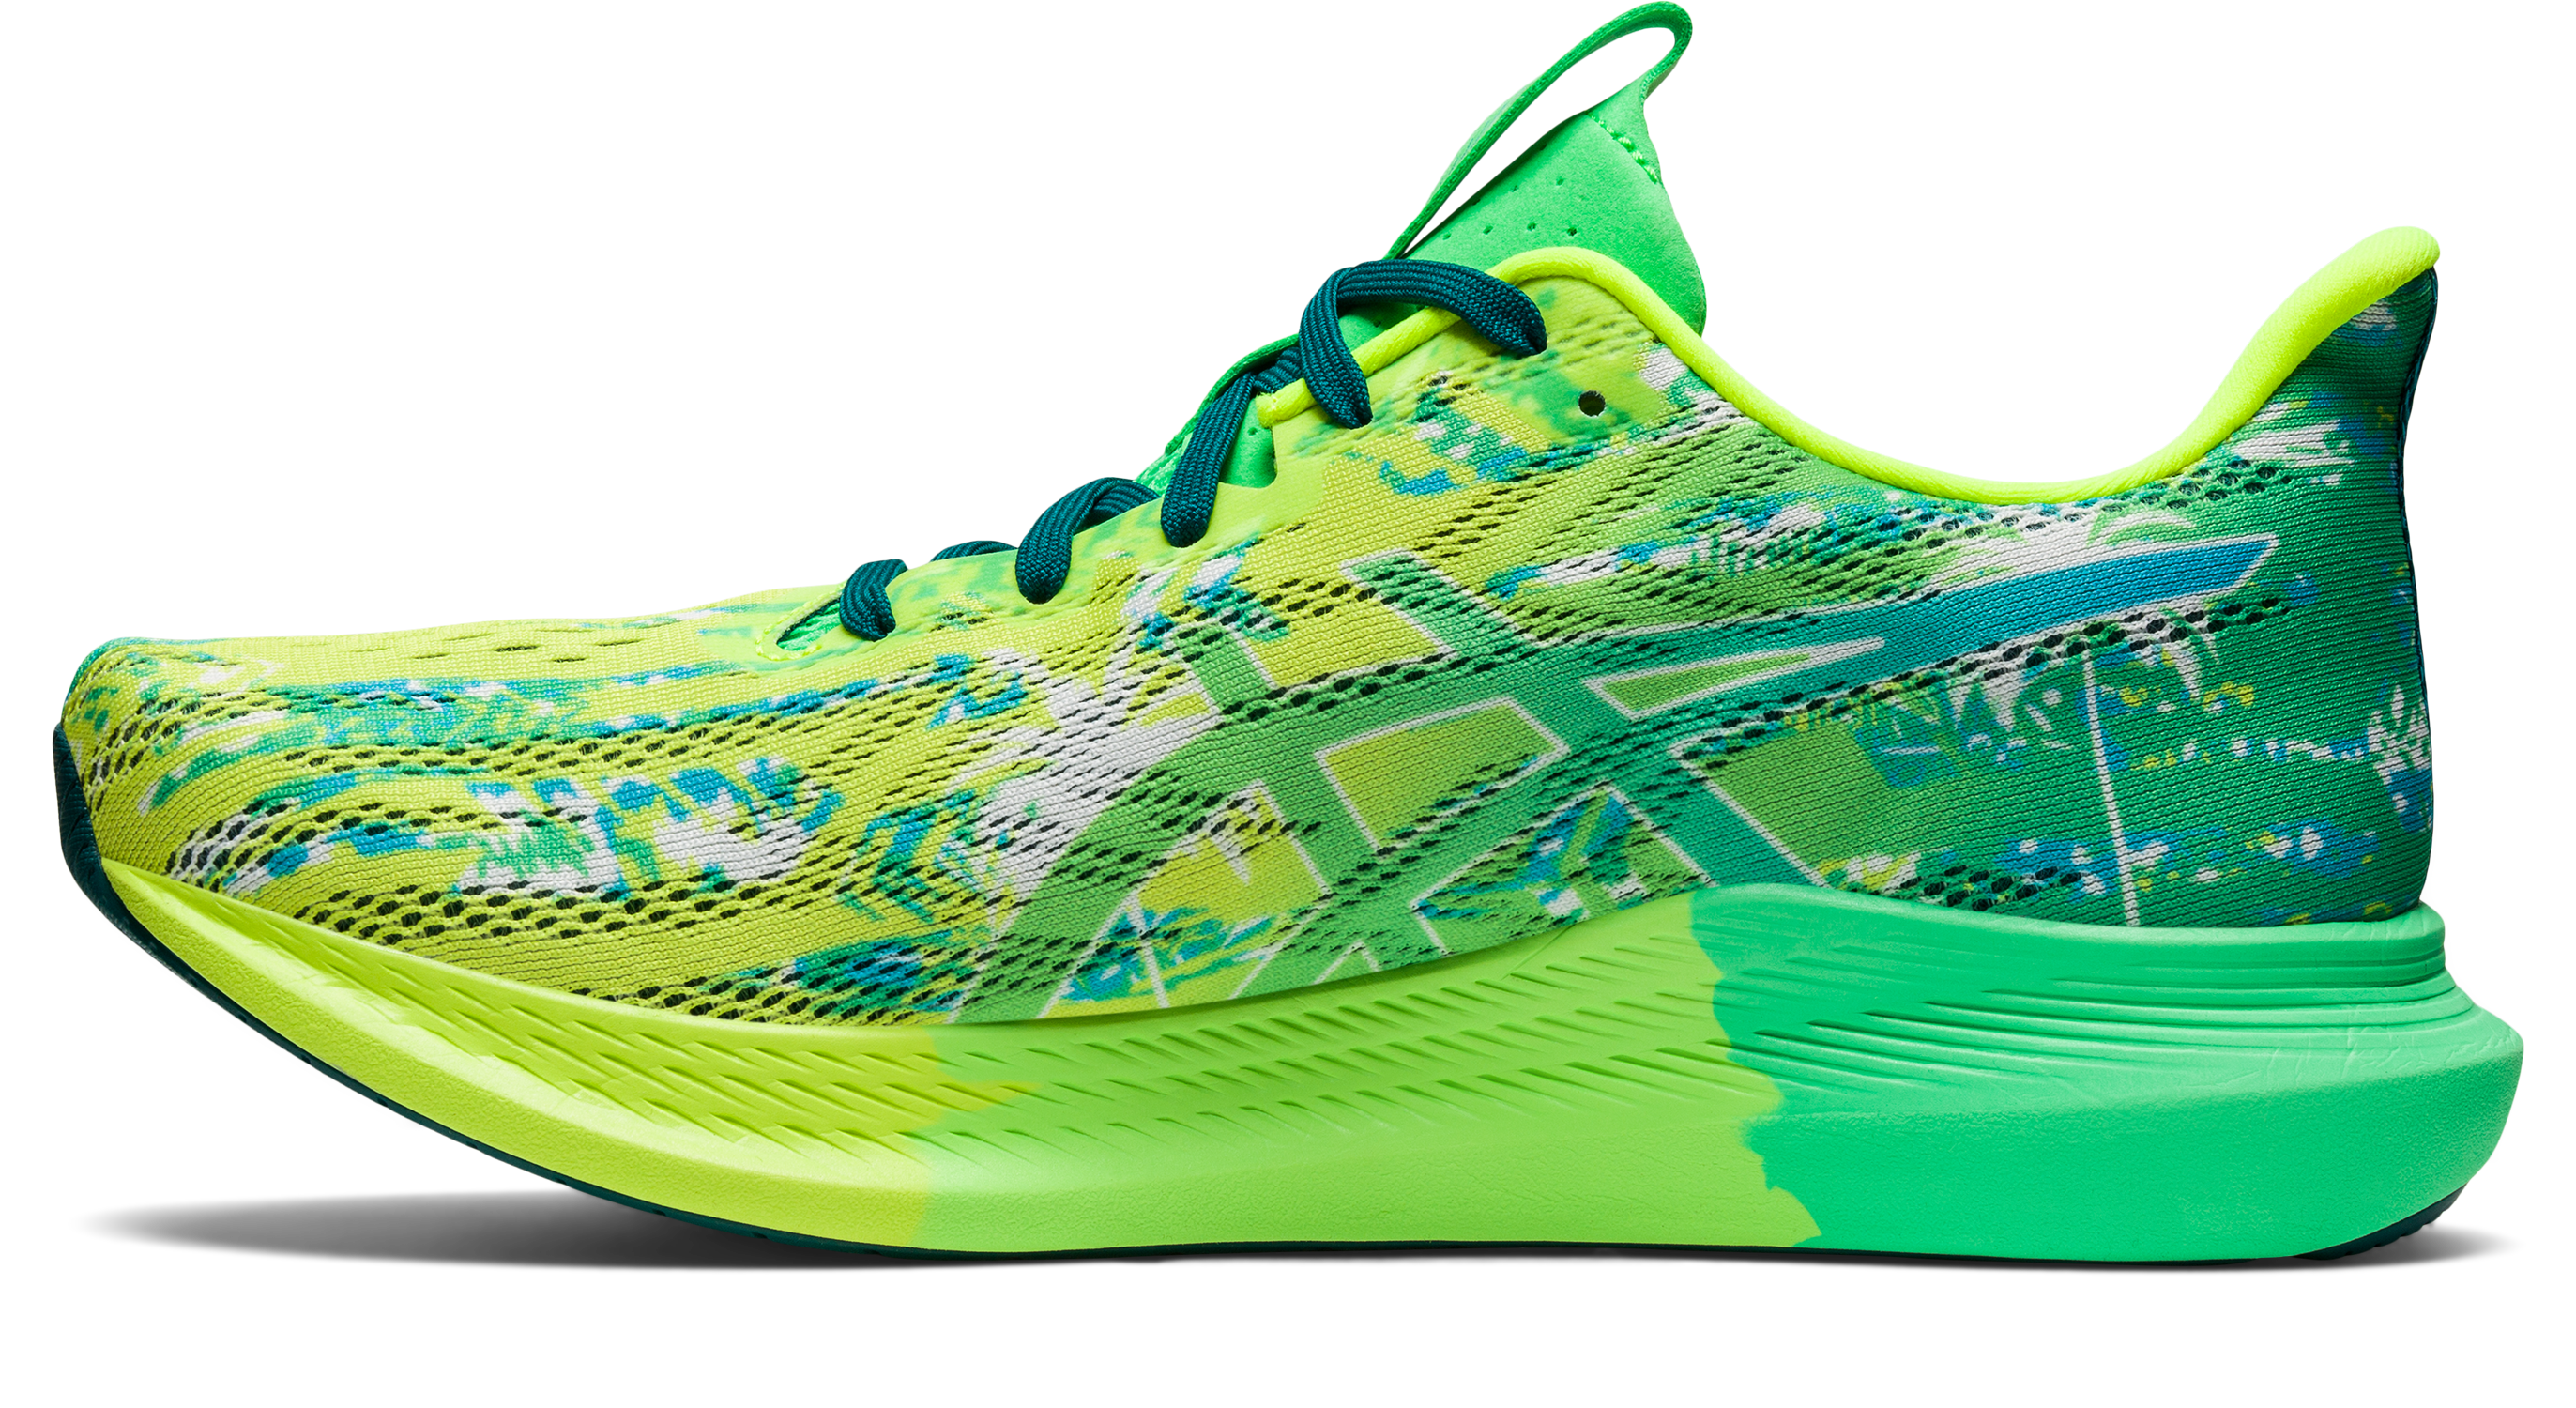 Asics Men's Noosa TRI 14 Running Shoes in Safety Yellow/White